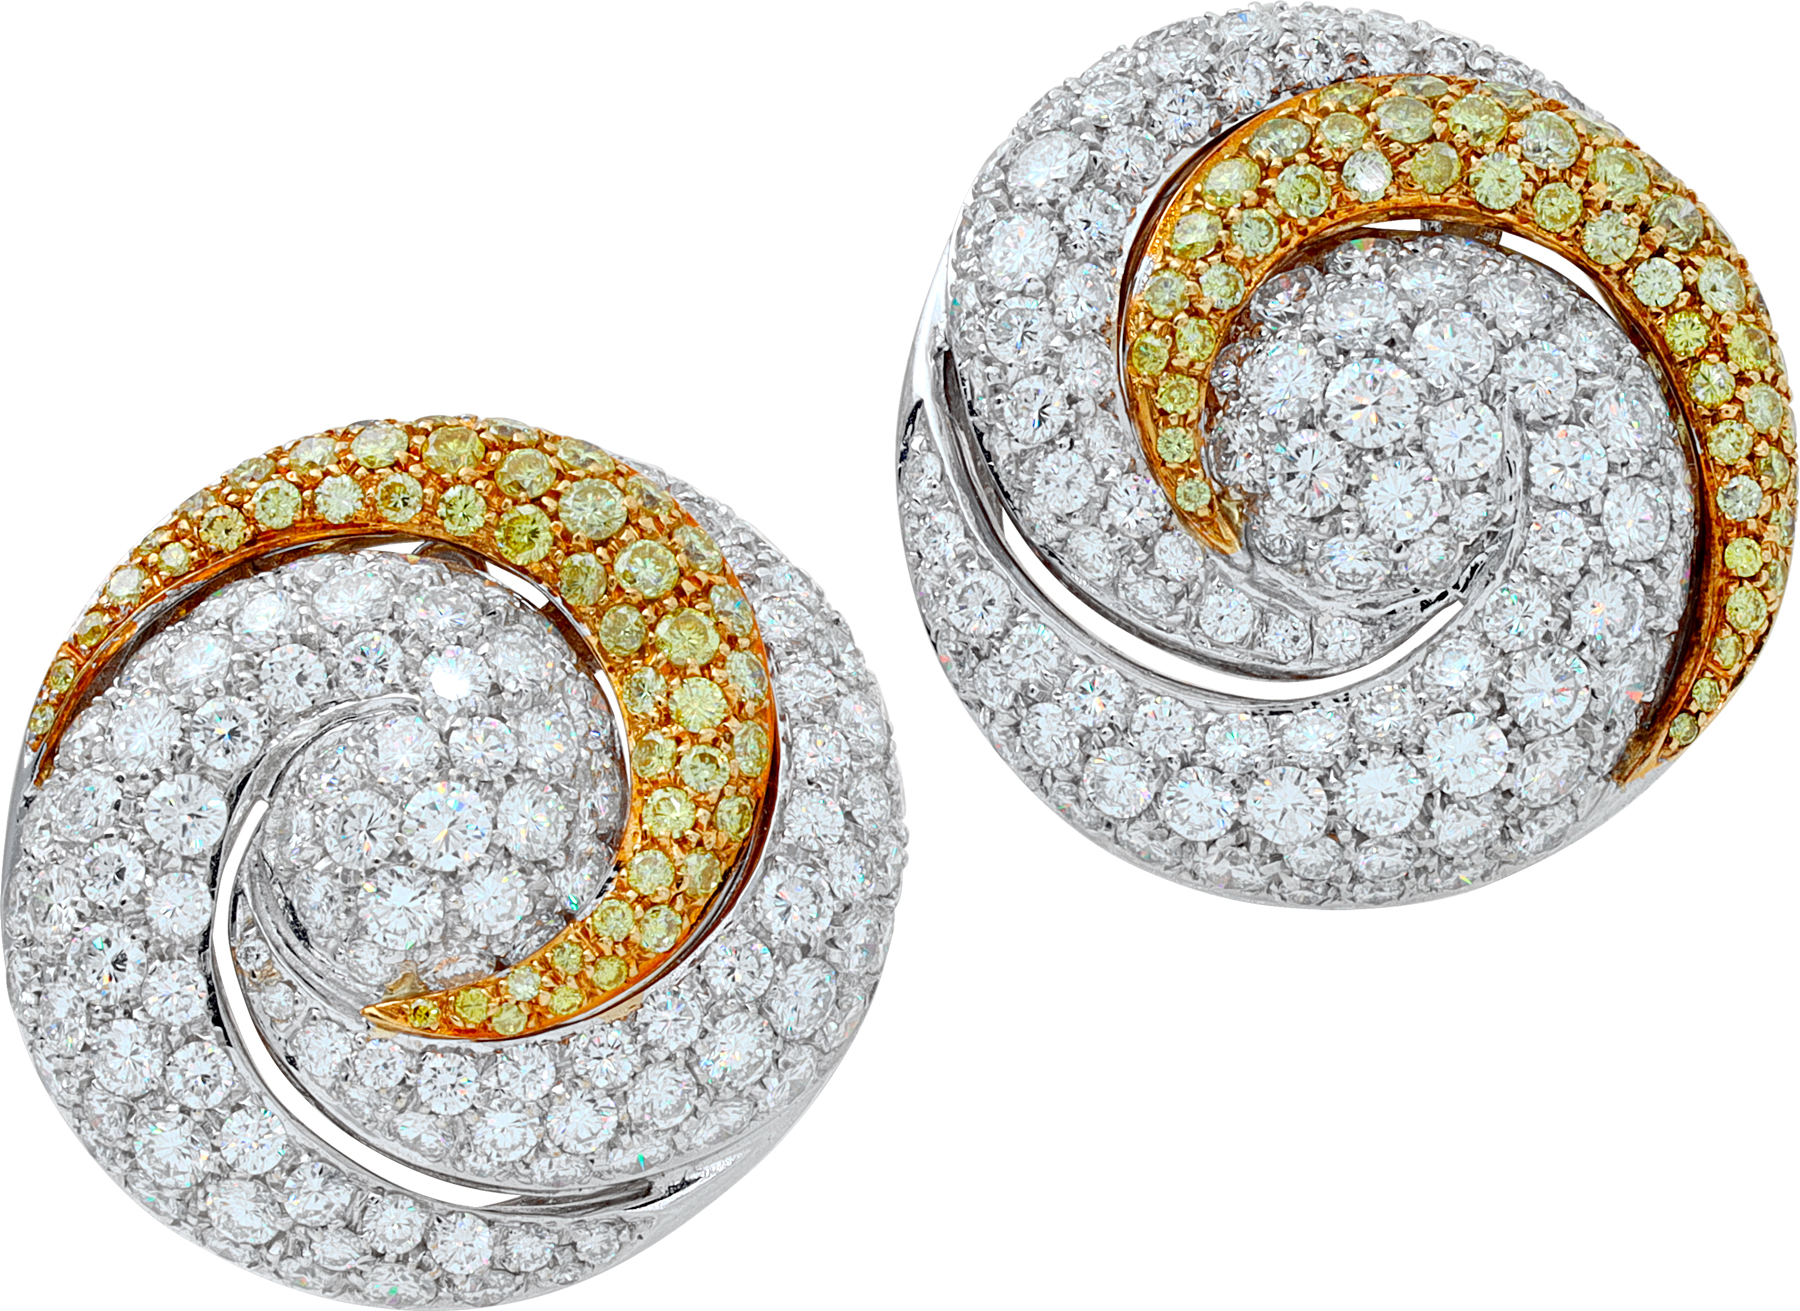 Dorfman swirled pave white and yellow diamond earrings in 18k white and yellow gold with over 6 carats